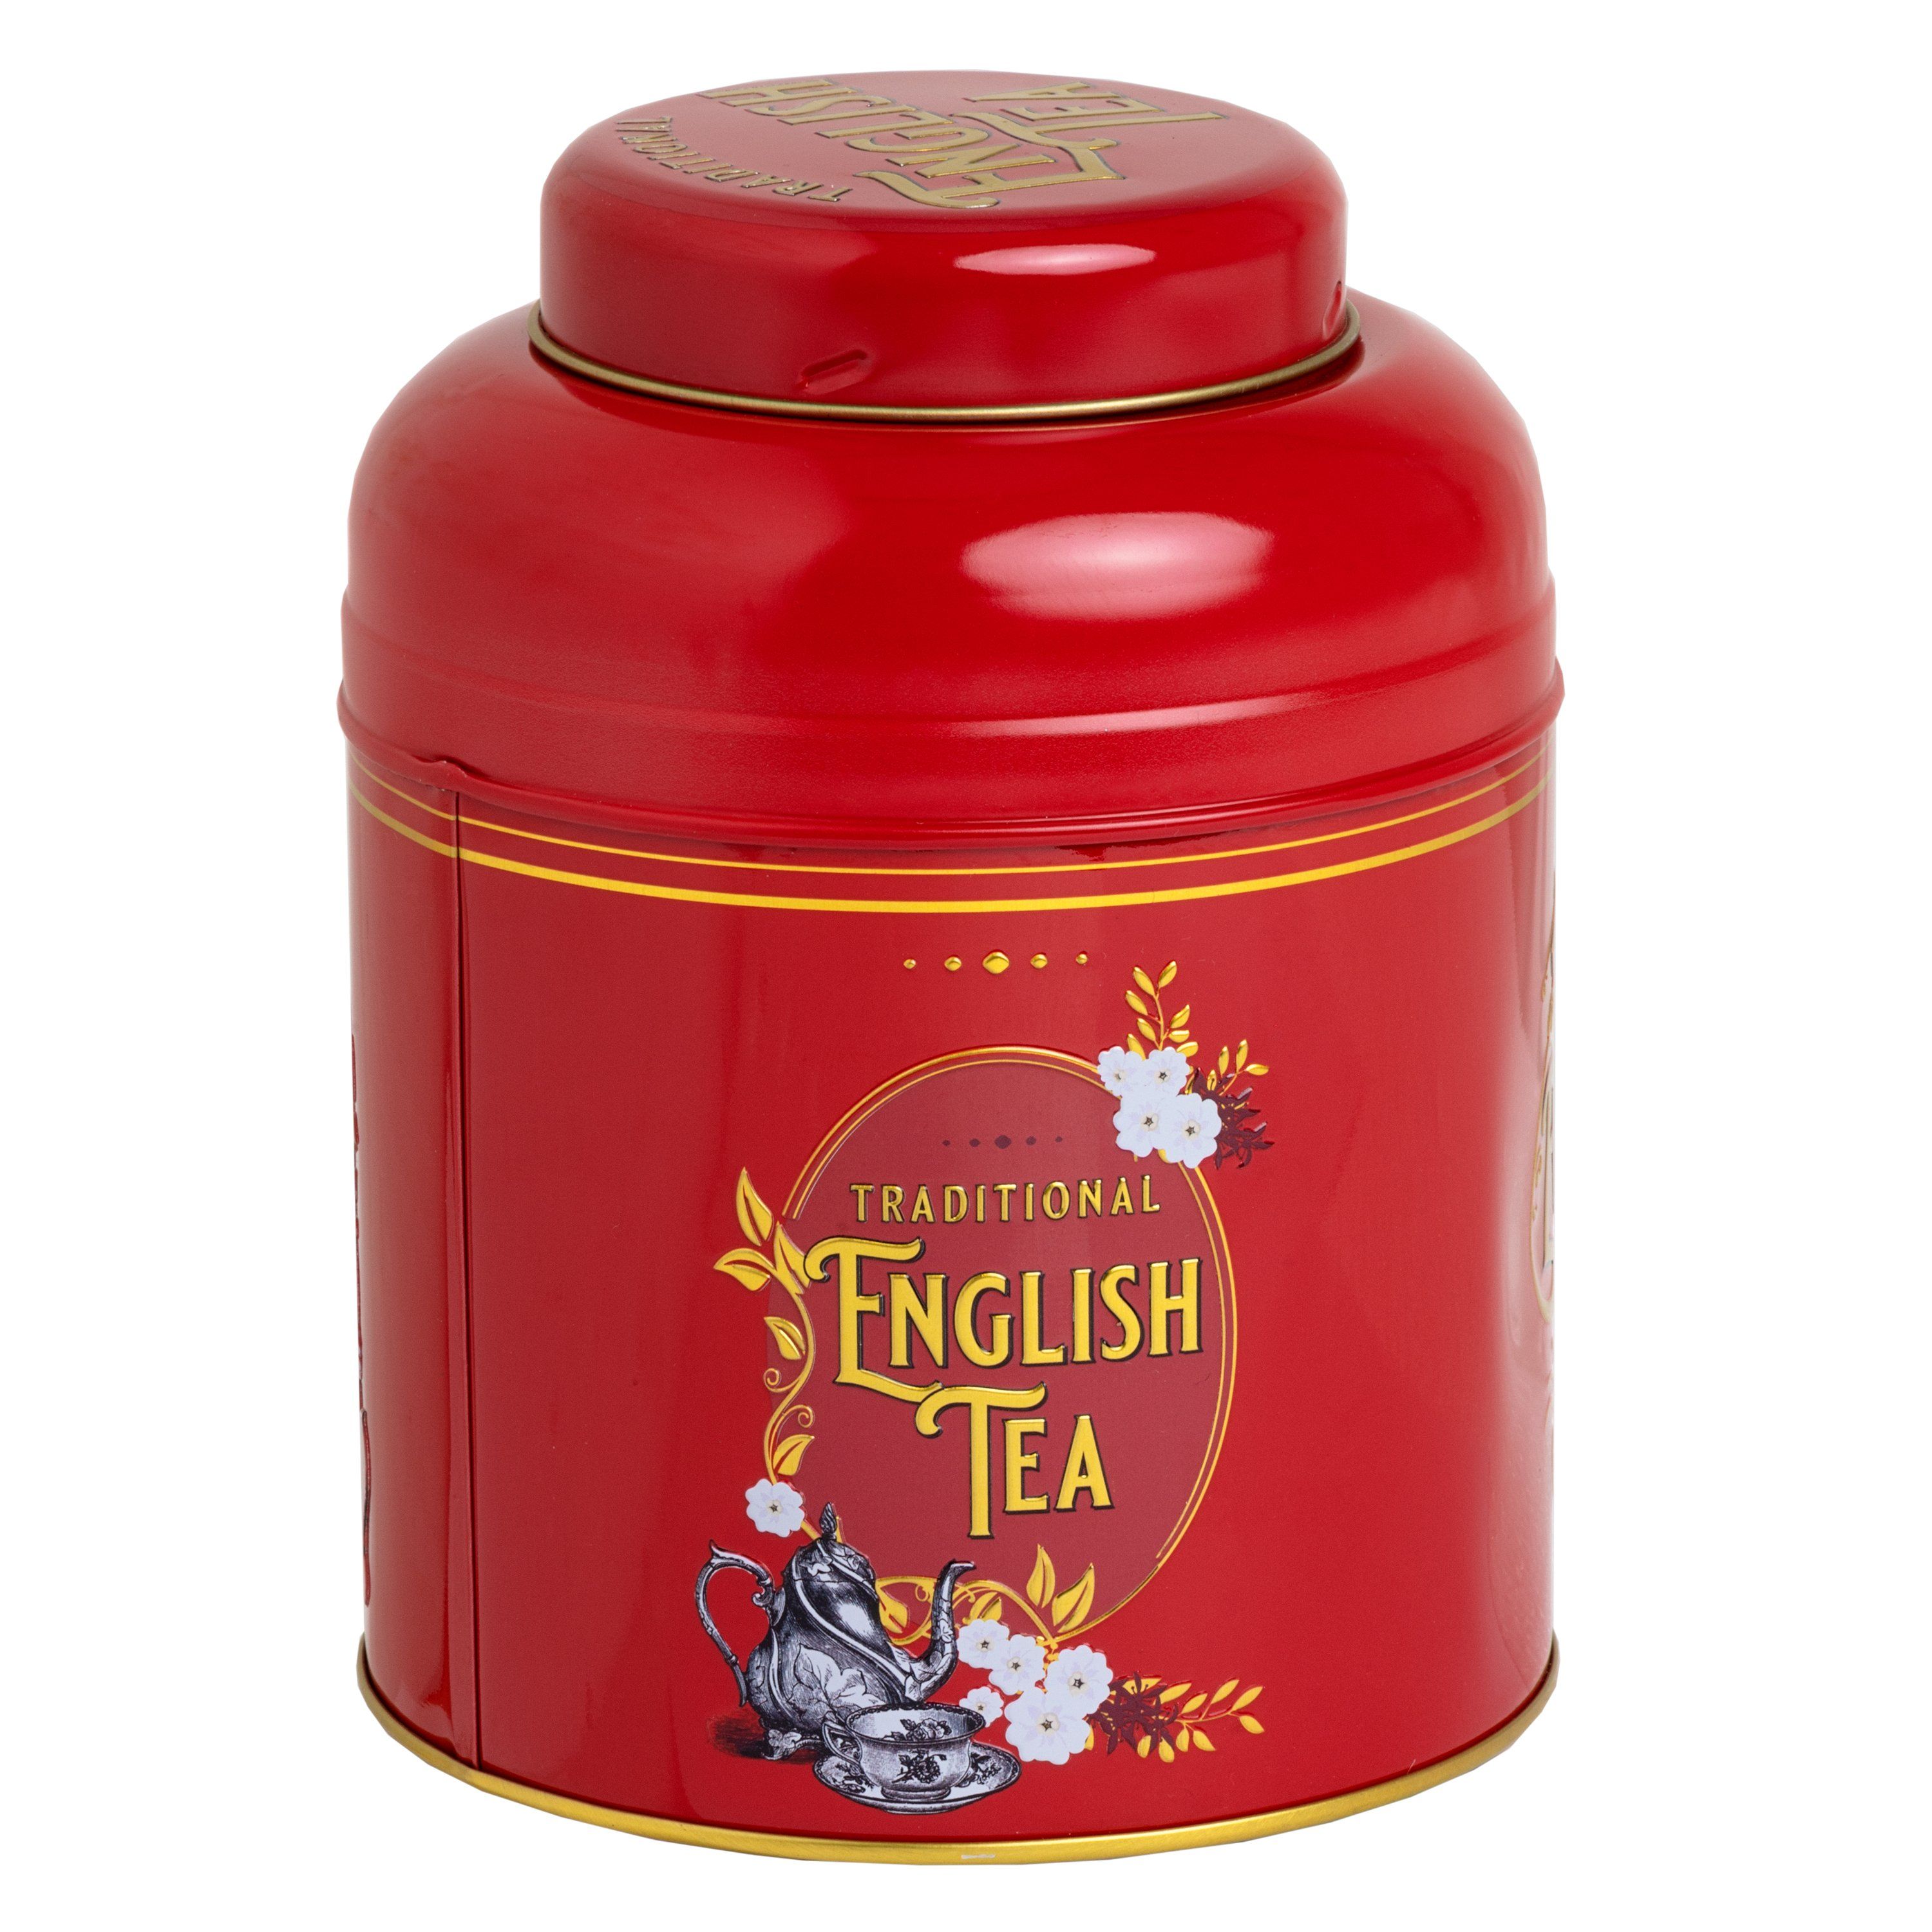 Vintage Victorian Tea Caddy, in red, with 80 English Breakfast Teabags Black Tea New English Teas 